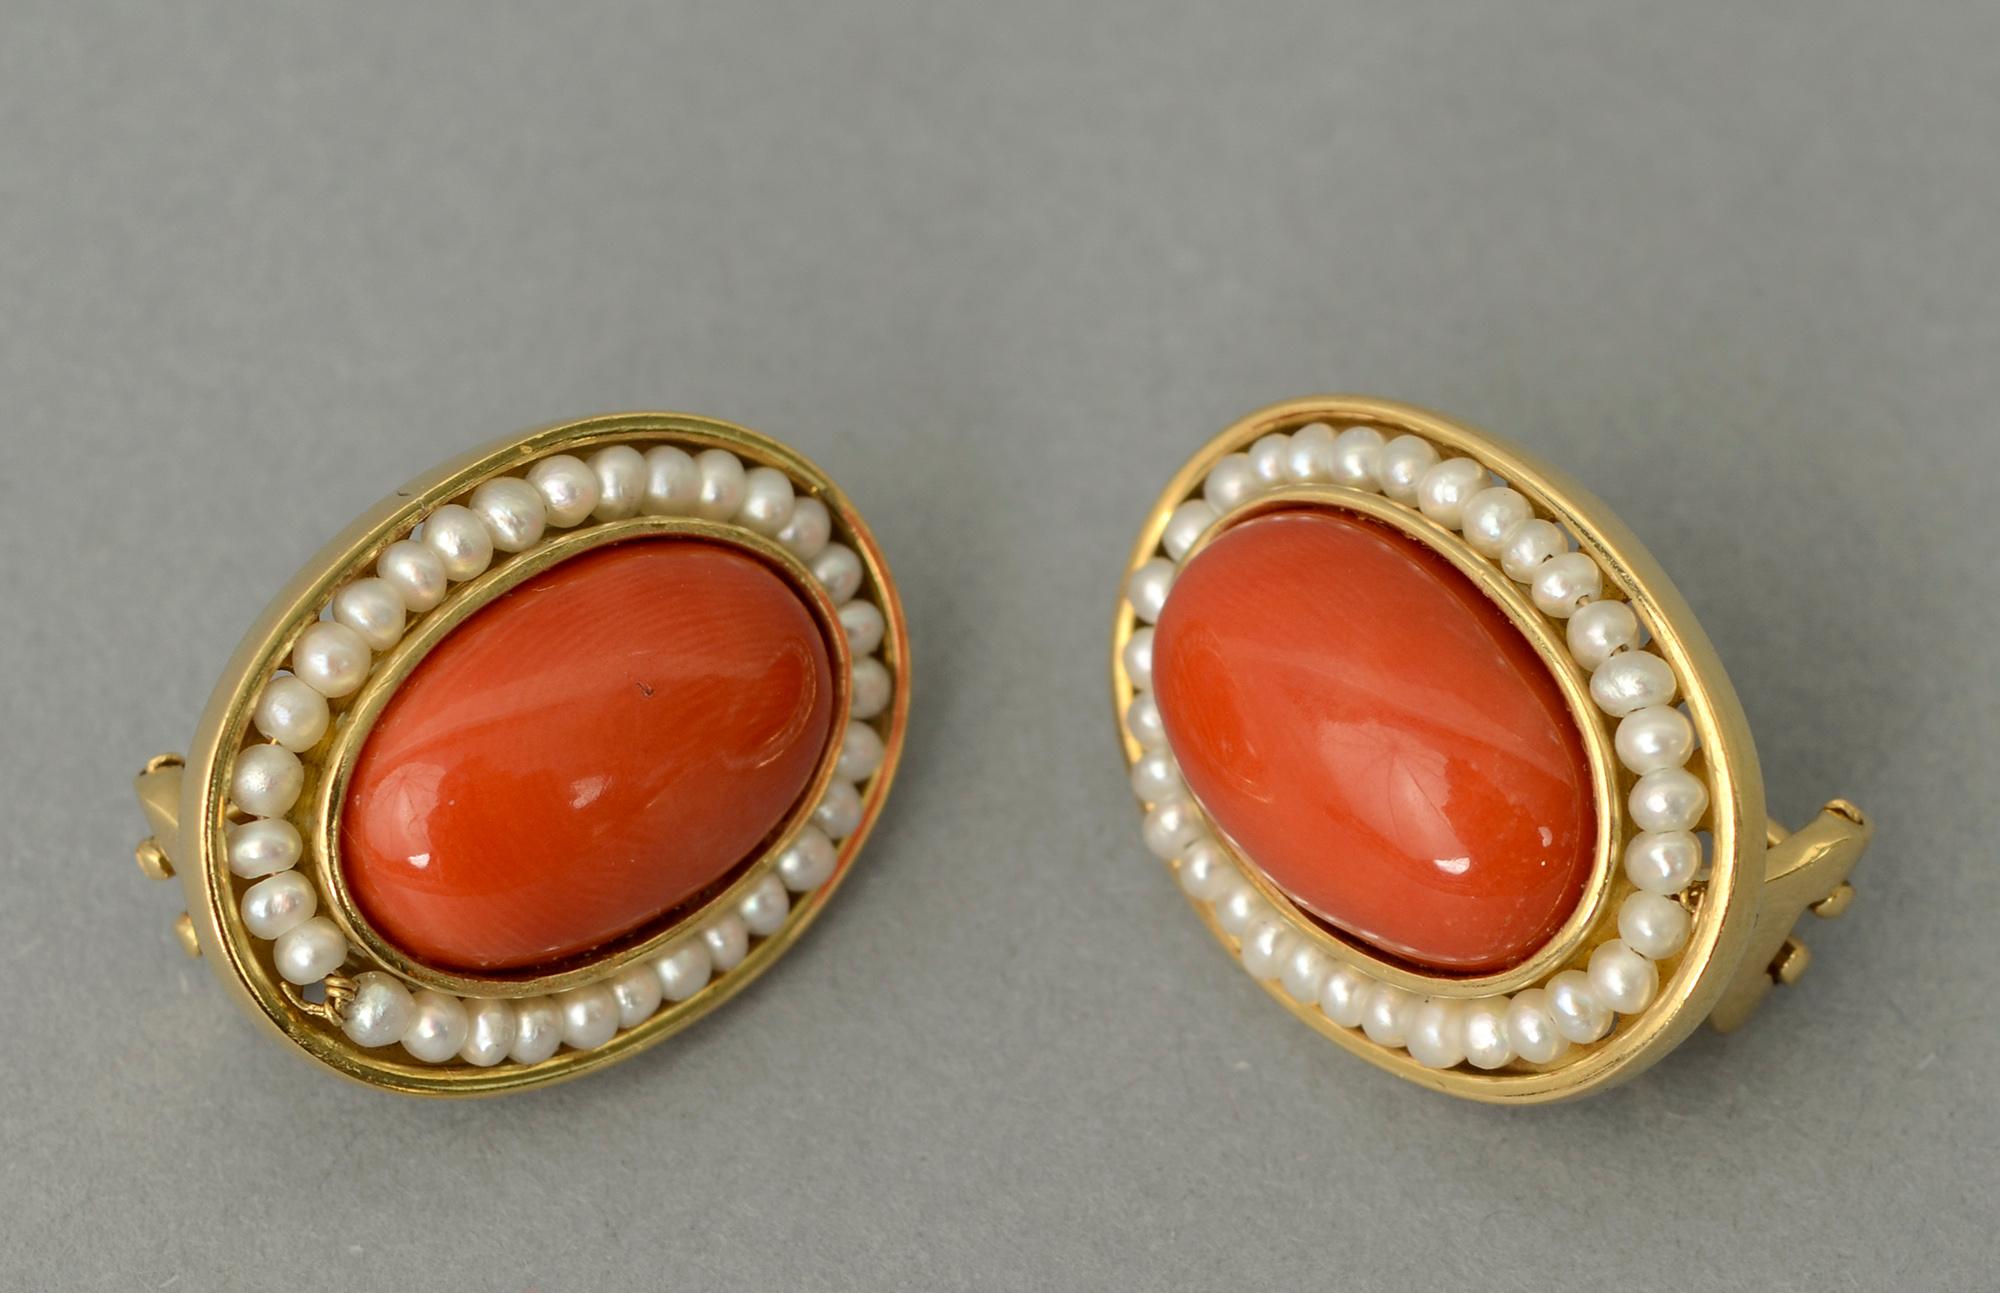 Unusual coral and natural pearl earrings set in 18 karat gold. The oval coral stones are half an inch by three quarters of an inch. Pearls are natural. The backs are clips and posts. A matching ring is available listed as item LU1336667831.